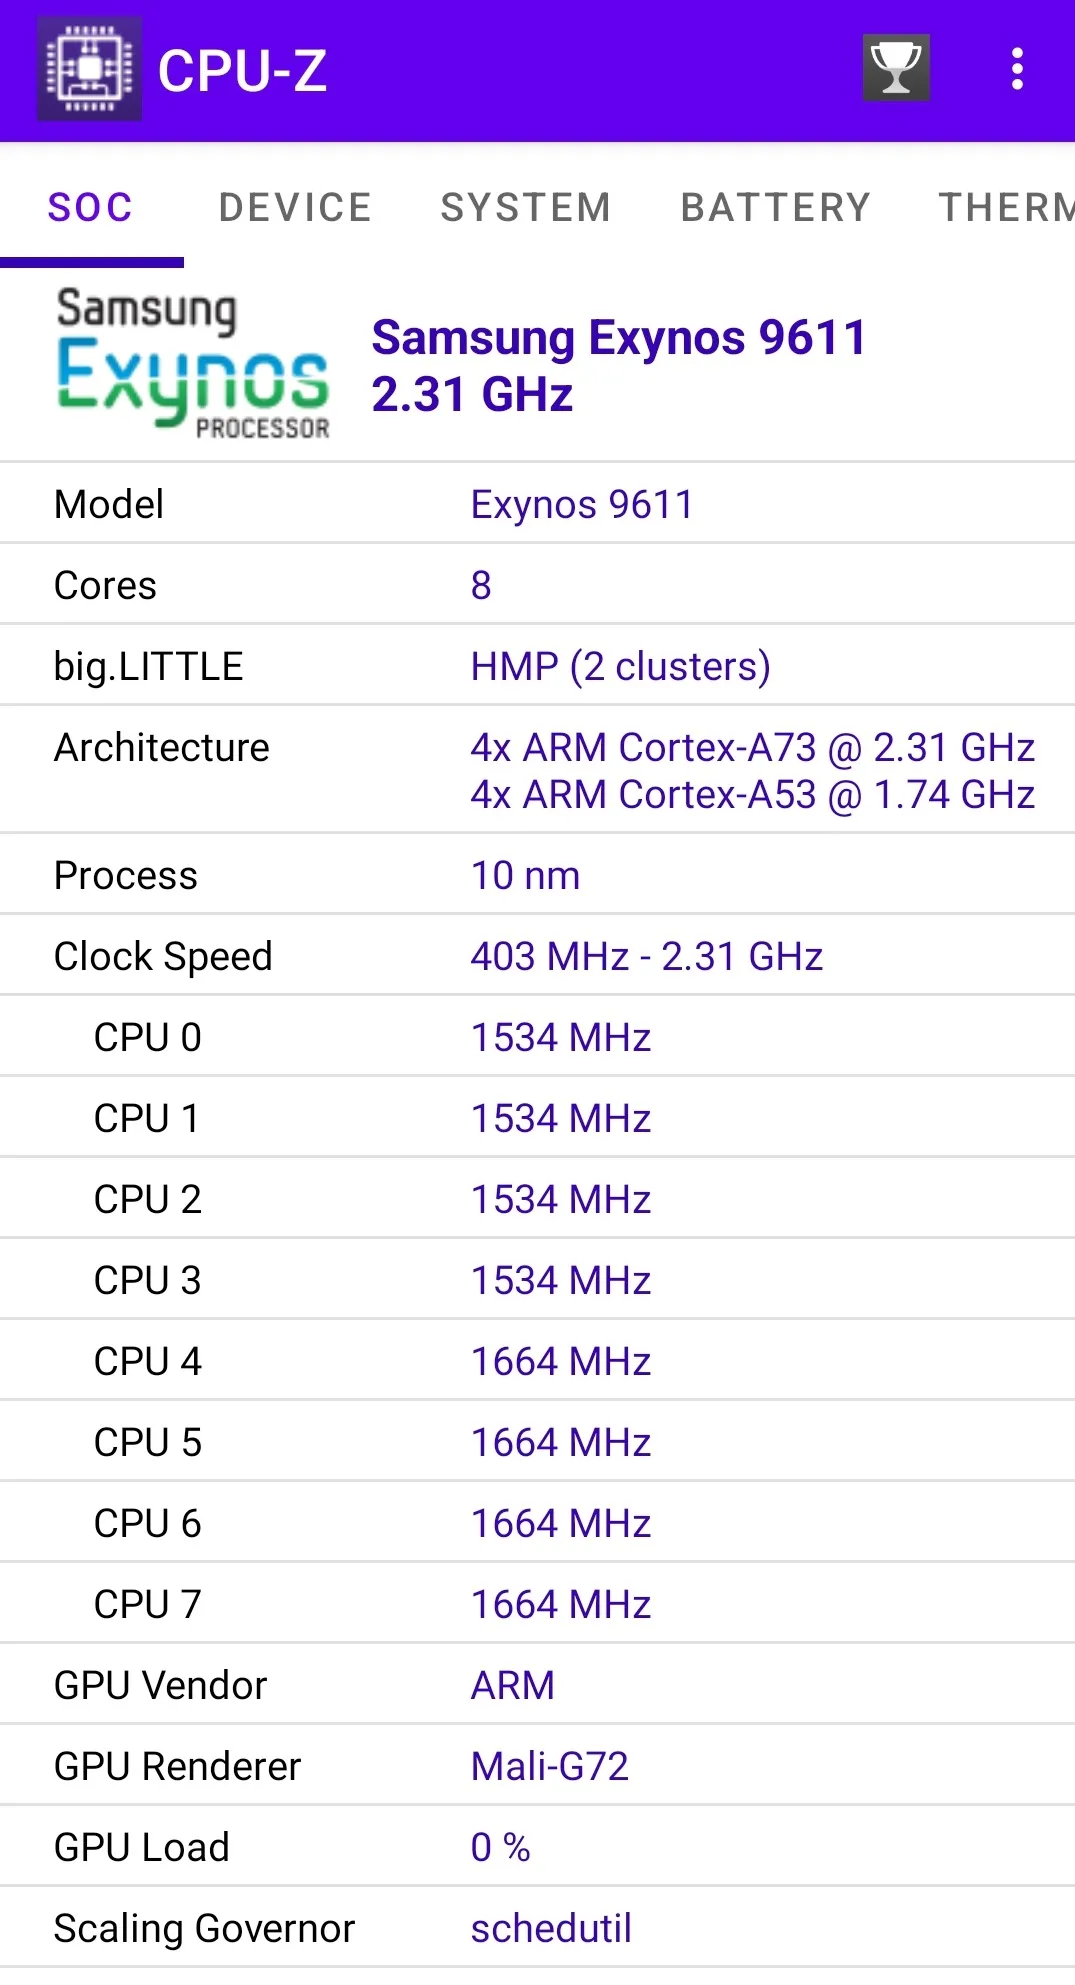 Android device specs in CPU-Z